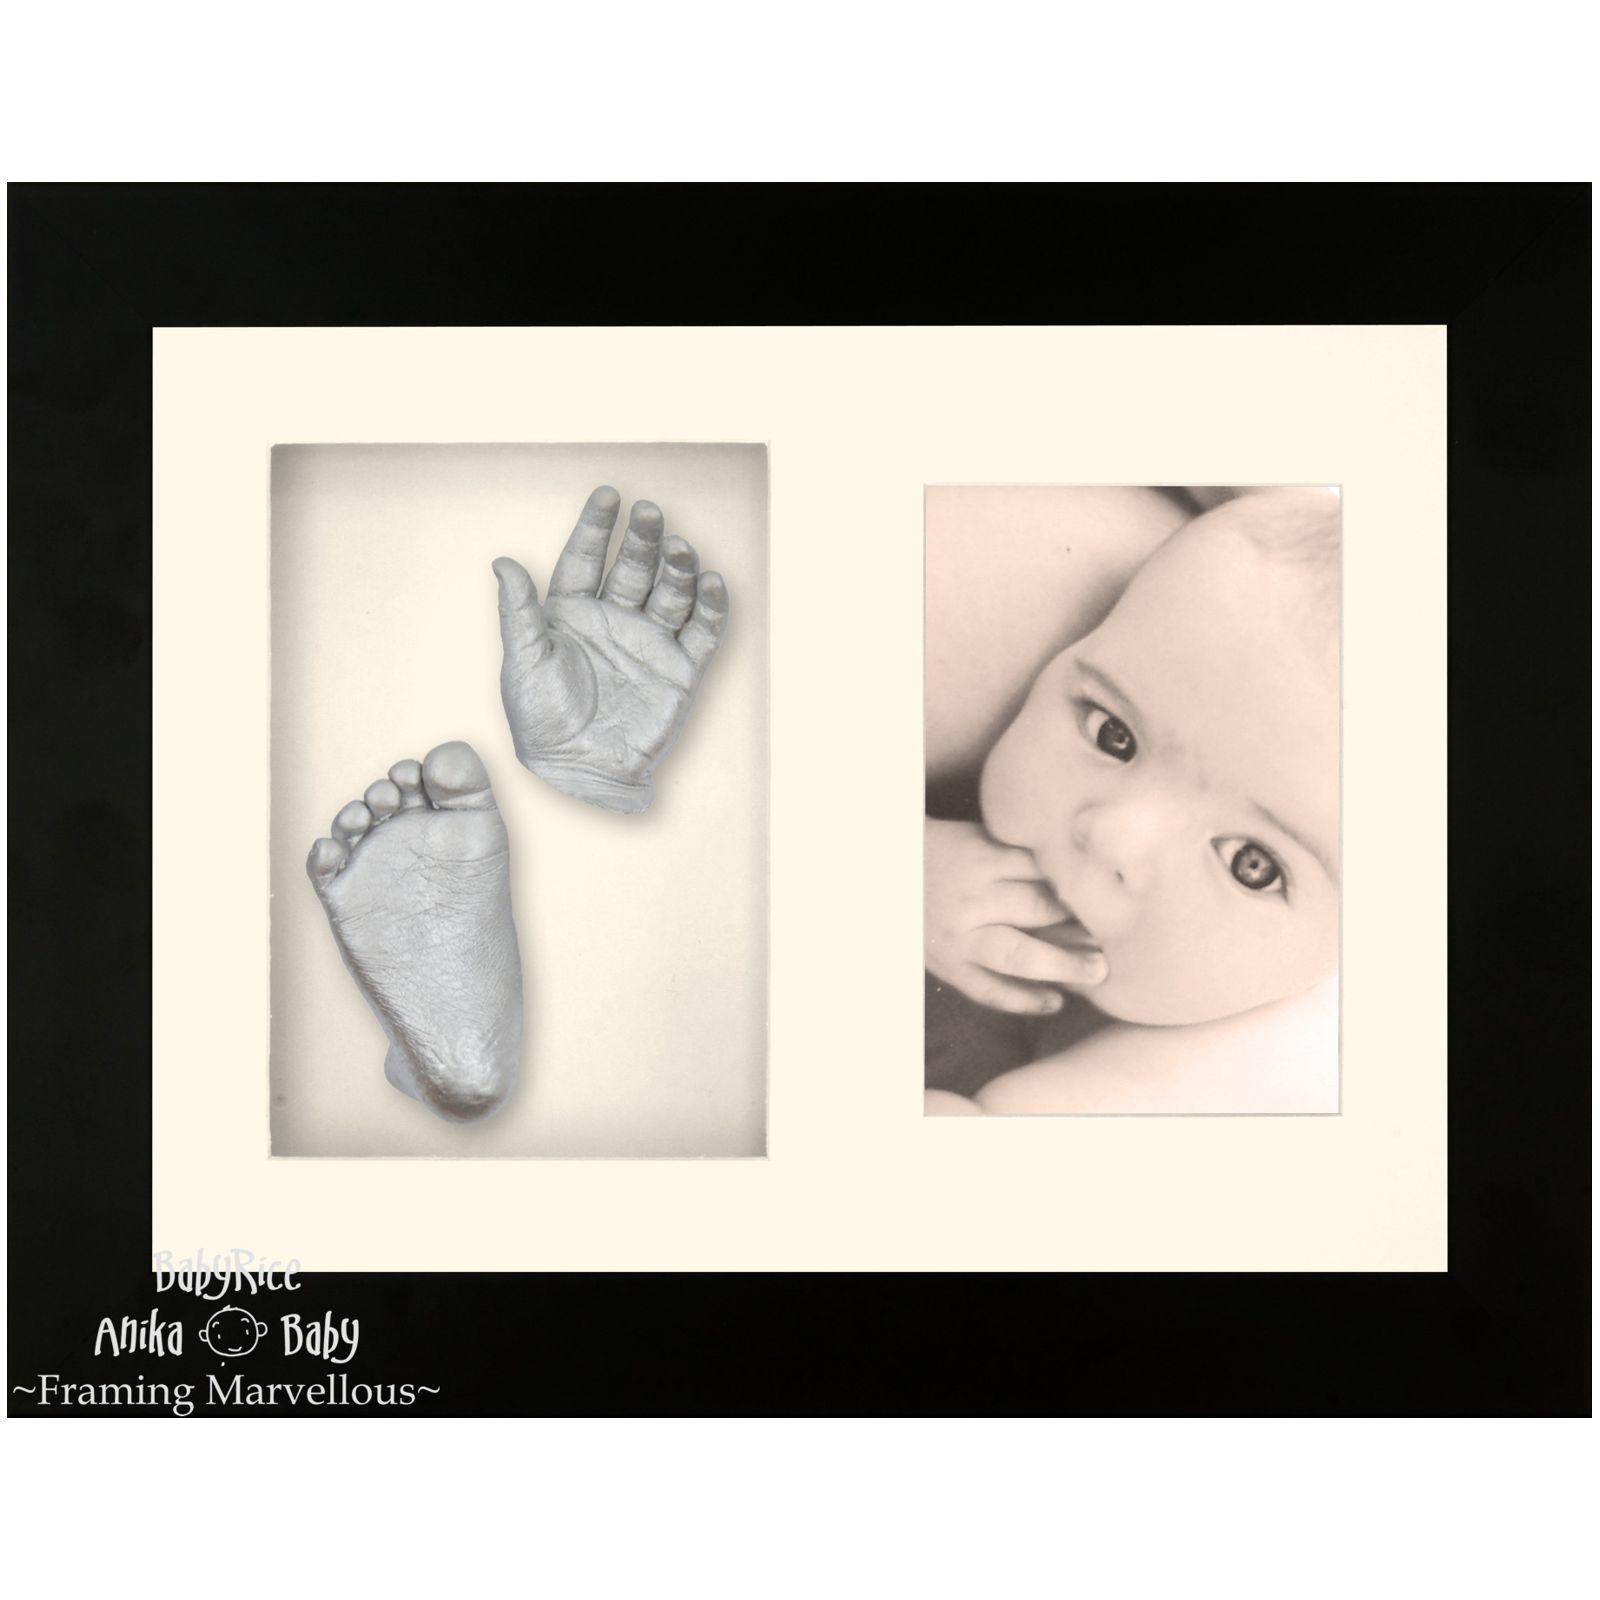 Baby Casting Kit with Black Photo and Casts Display Frame Cream Inserts / Silver Paint